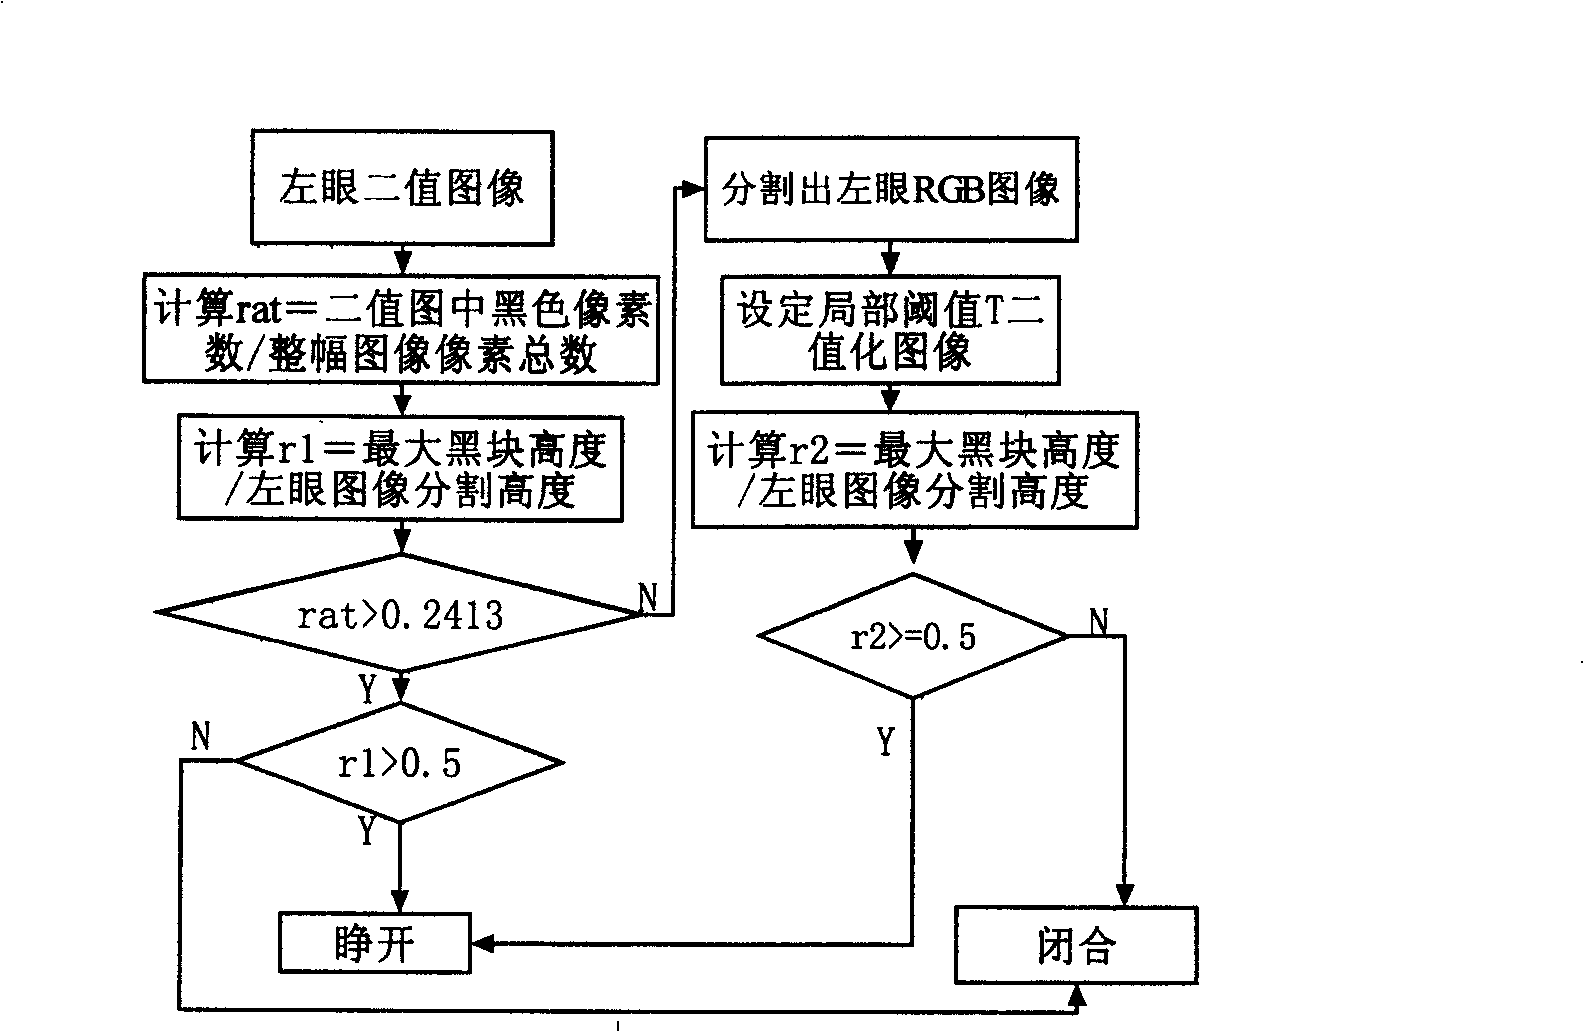 Human eye positioning and human eye state recognition method